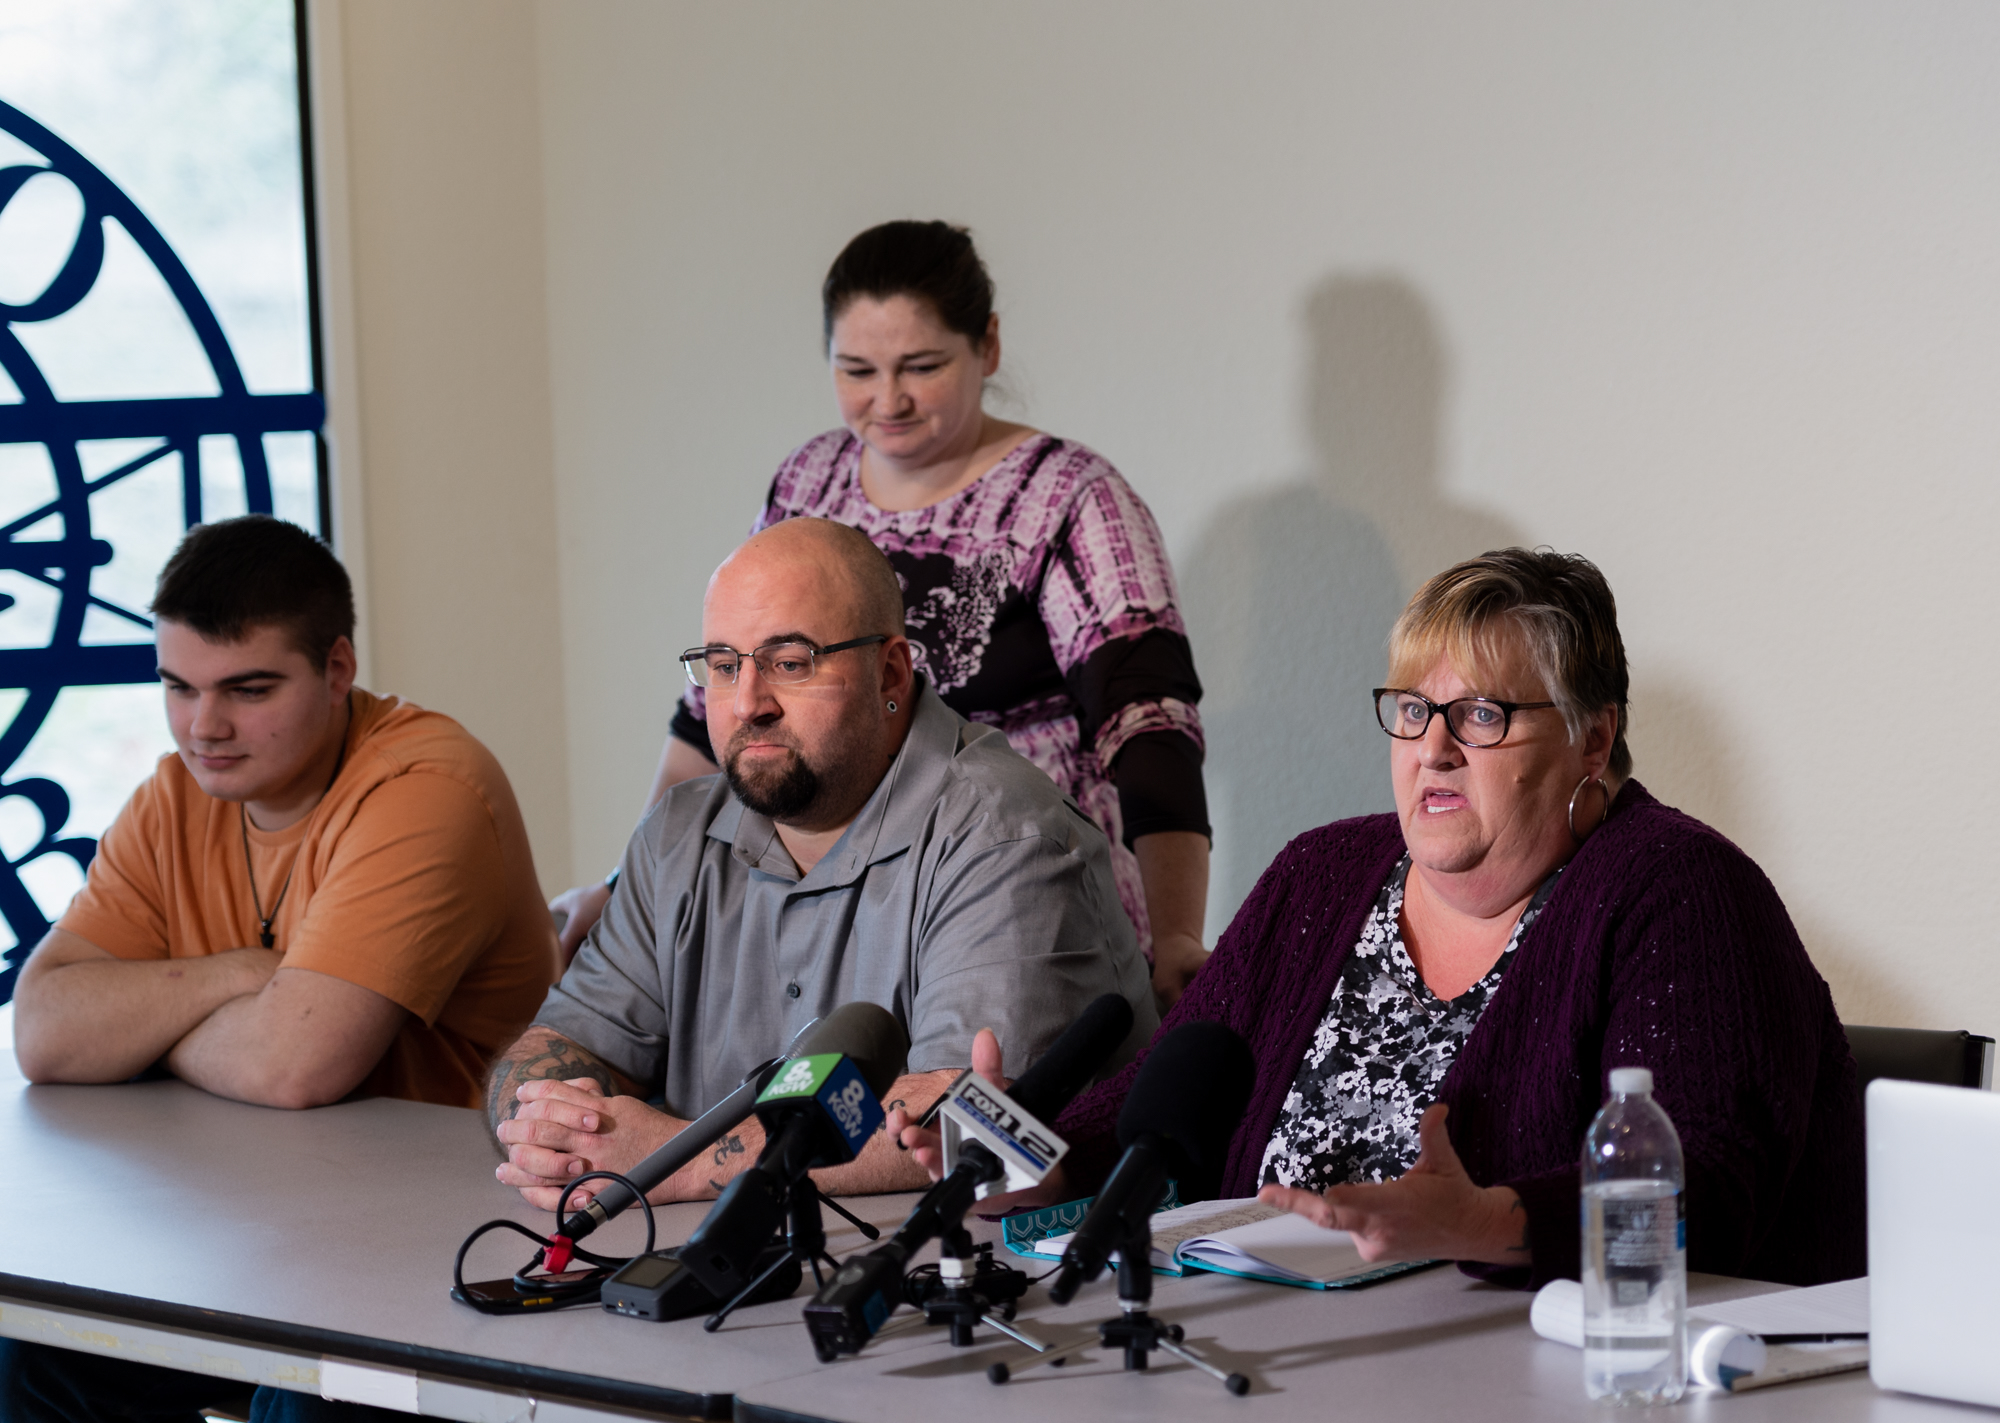 From left, Logan Shorthill, Misty Shorthill and Josh Shorthill listen on while Sue Zawacki, Jenoah Donald's mother, speaks at a press conference on Thursday, Feb. 17, at the Aero Club in Salmon Creek. The family of Jenoah Donald, who was fatally shot by a Clark County Sheriff's deputy last February, held the press conference to answer questions regarding the wrongful death claim they filed in June.